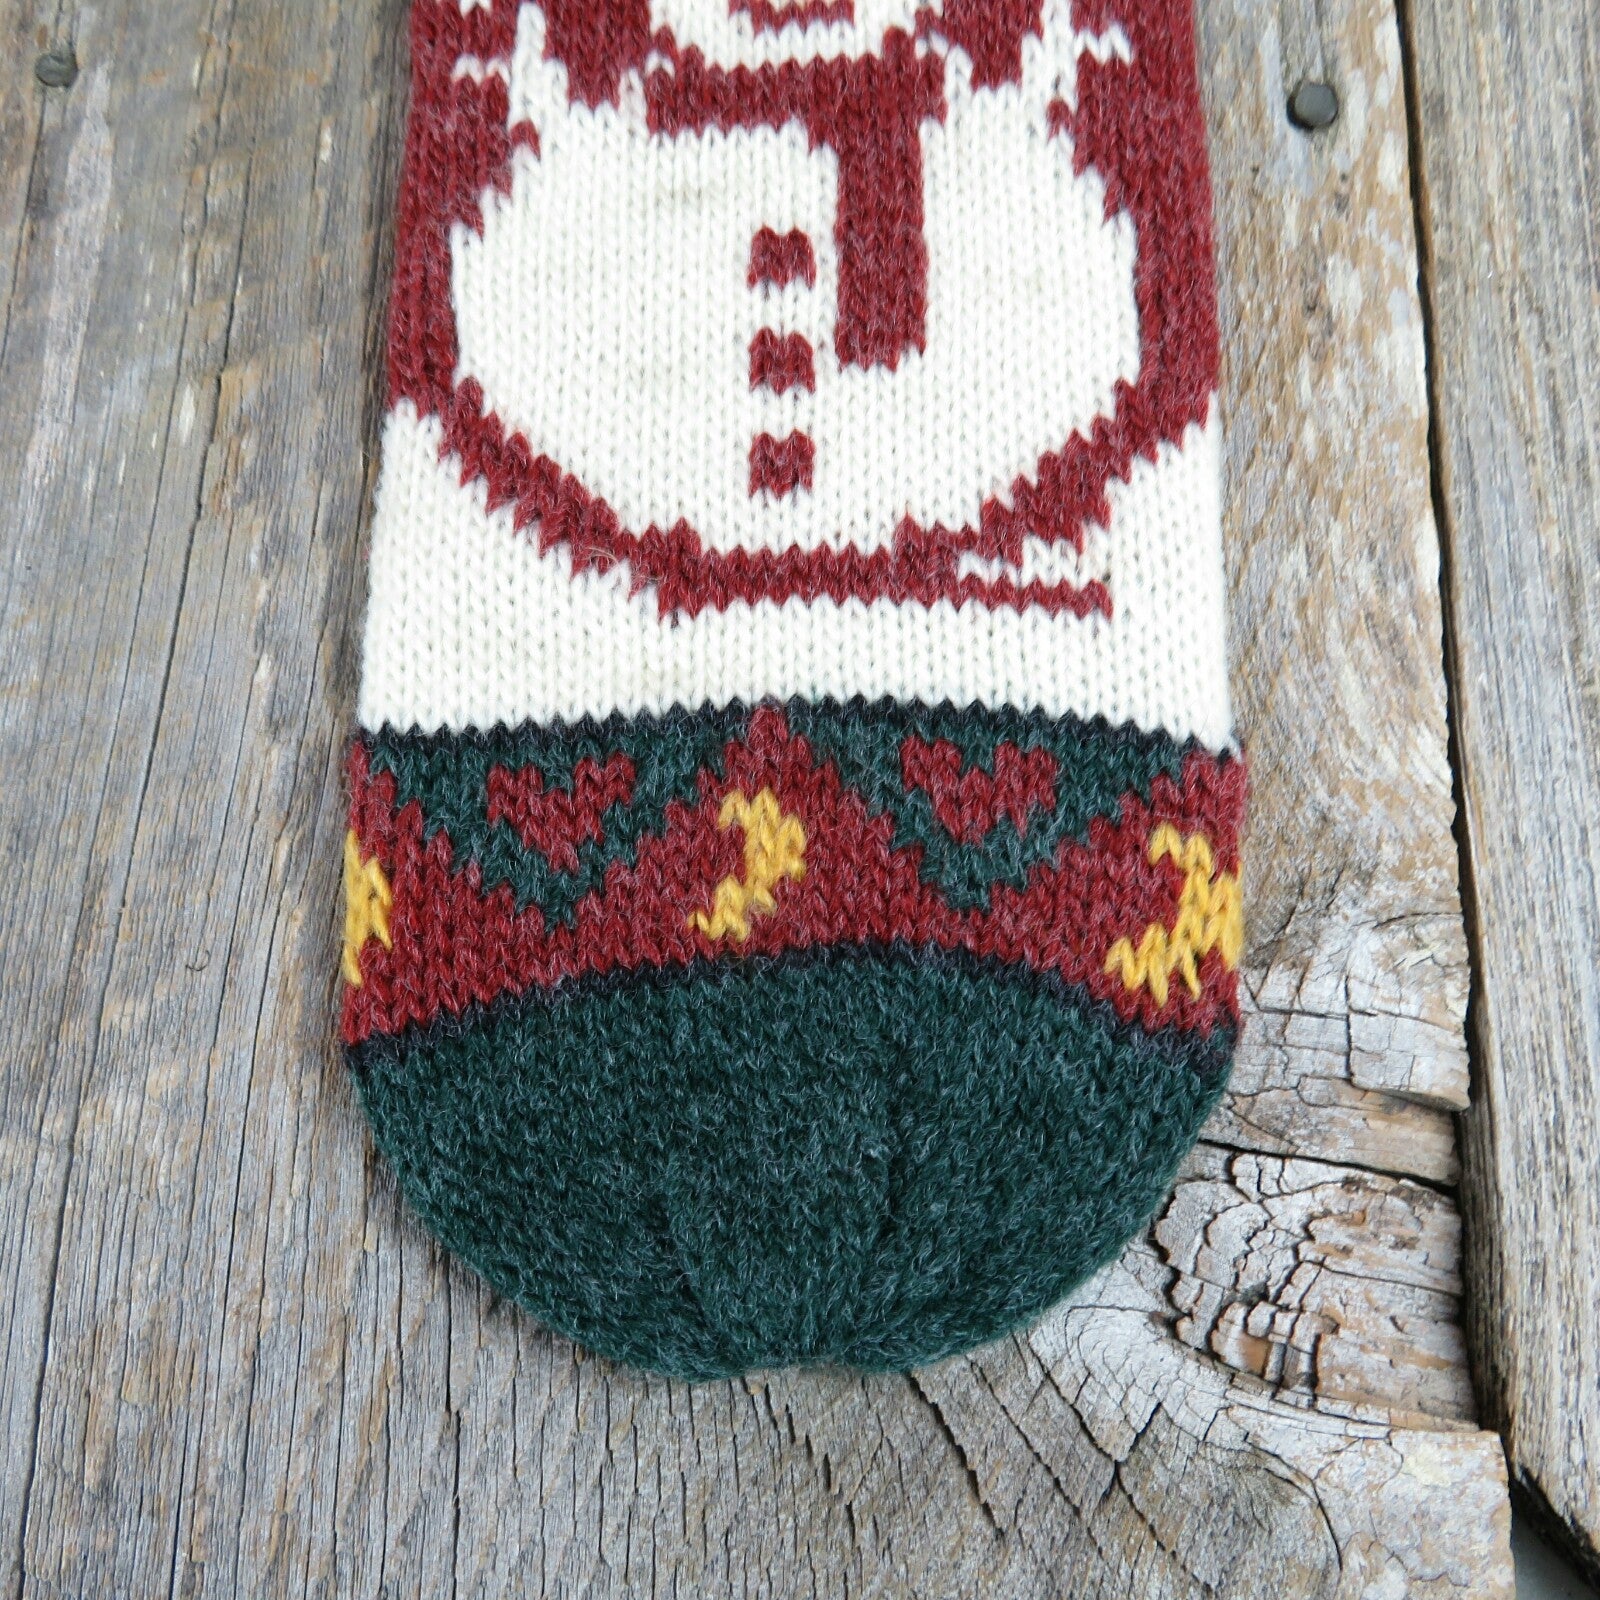 Vintage Wine or Cider Bottle Cover Stocking Knitted Knit Christmas Wool Snowman Red Green ST124 Snow Holiday Decor - At Grandma's Table